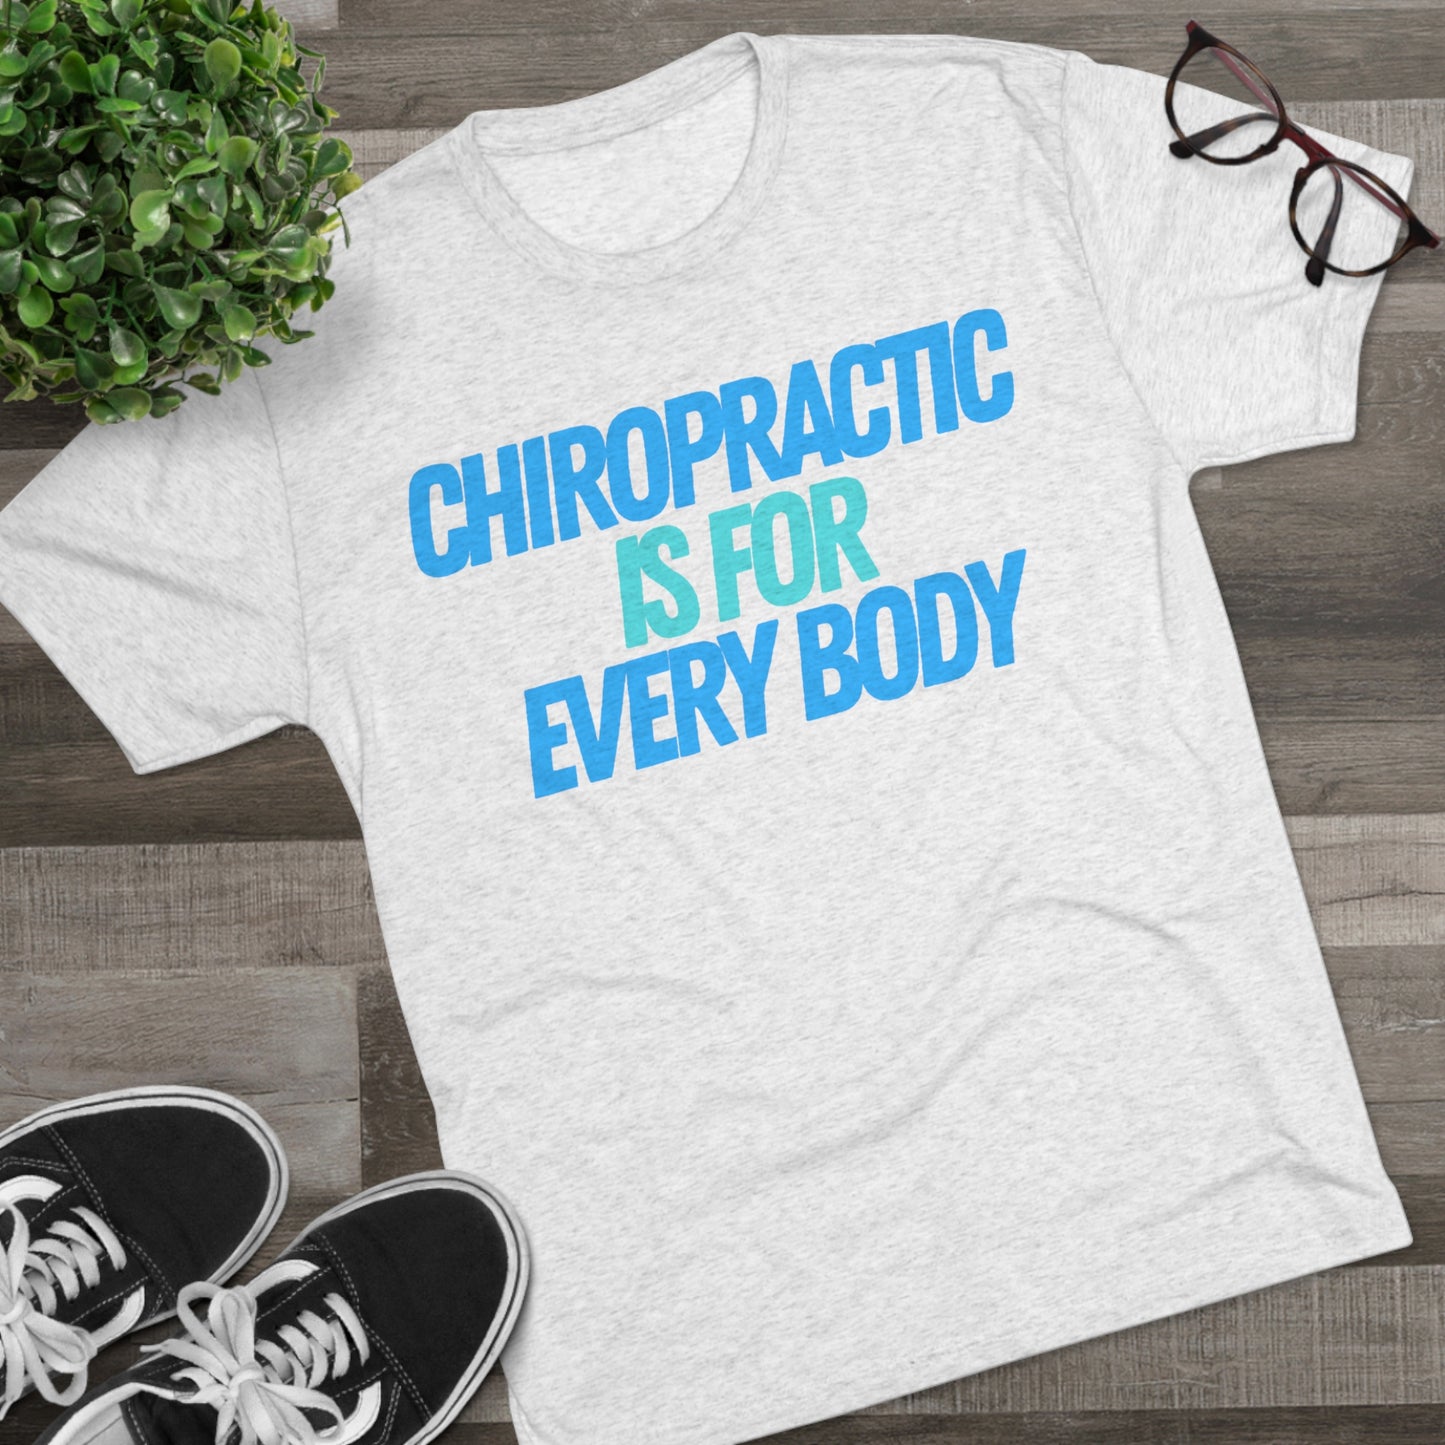 Chiropractic Is For Every Body - Next Level Men's Tri-Blend Crew Tee